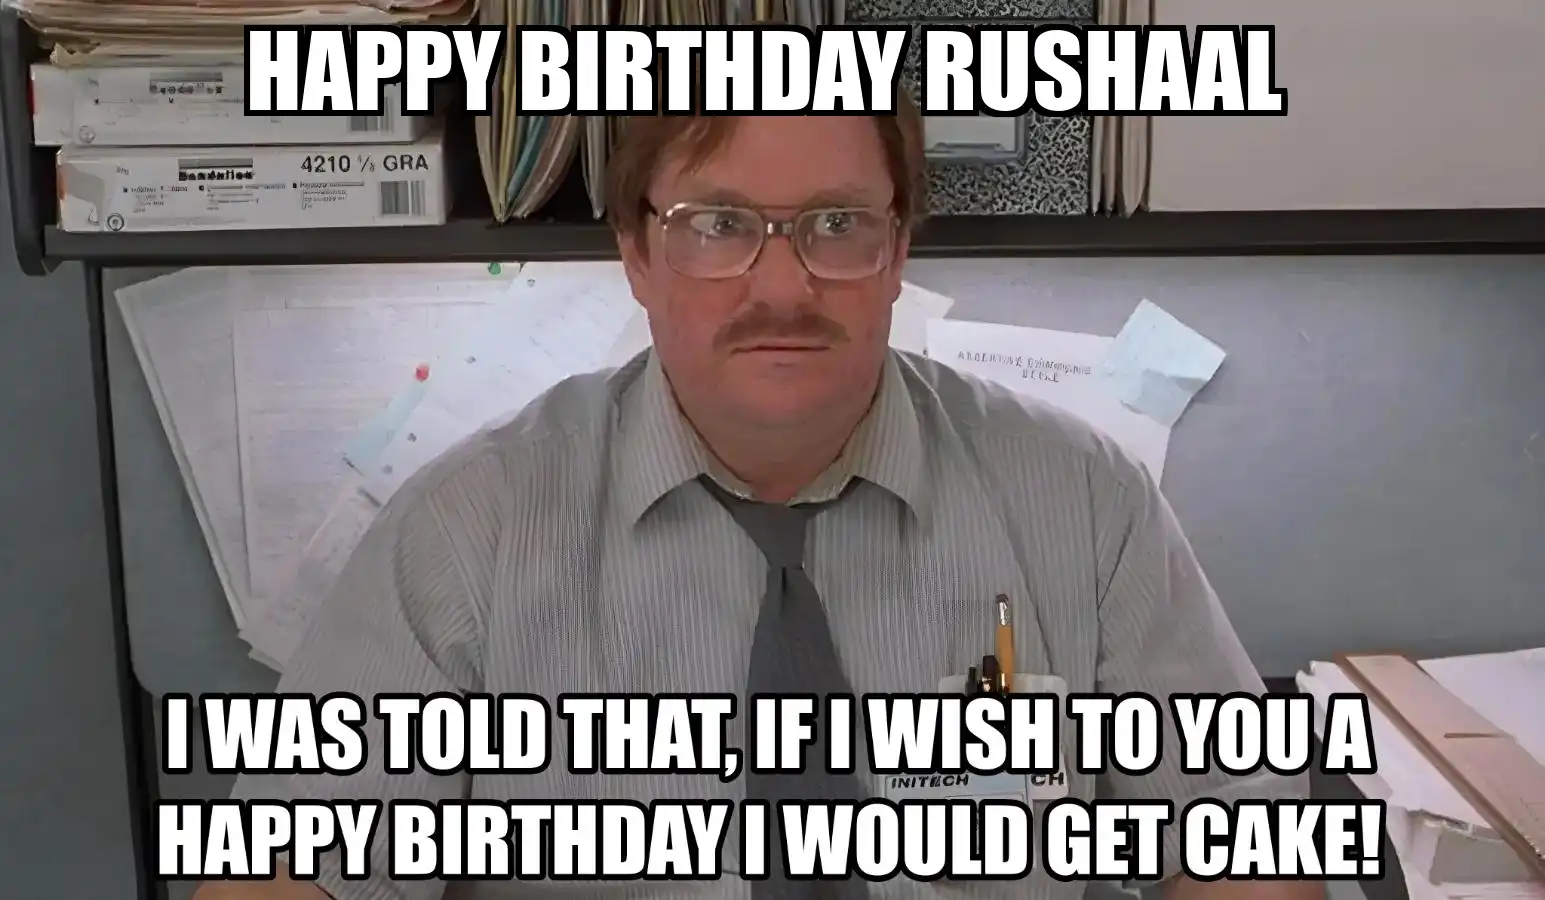 Happy Birthday Rushaal I Would Get A Cake Meme